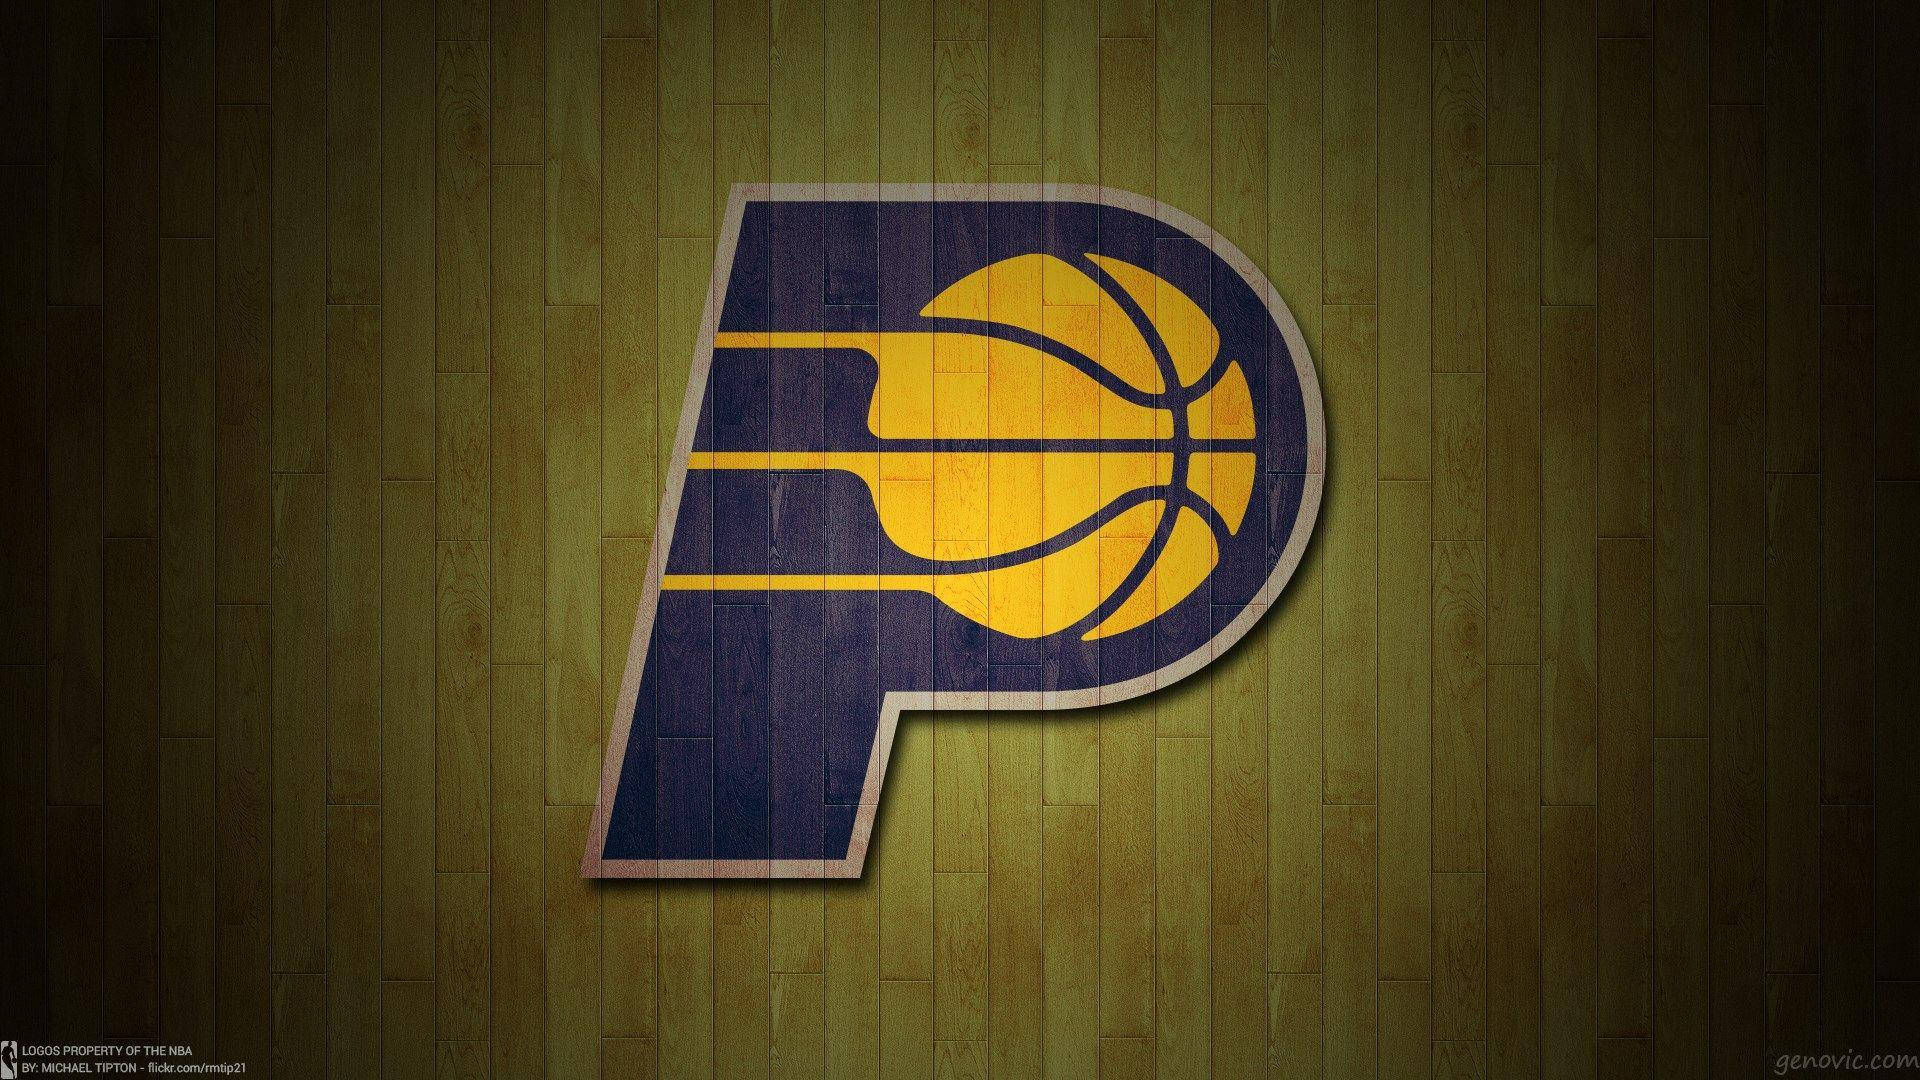 Indiana Pacers Logo On Wooden Floor Background